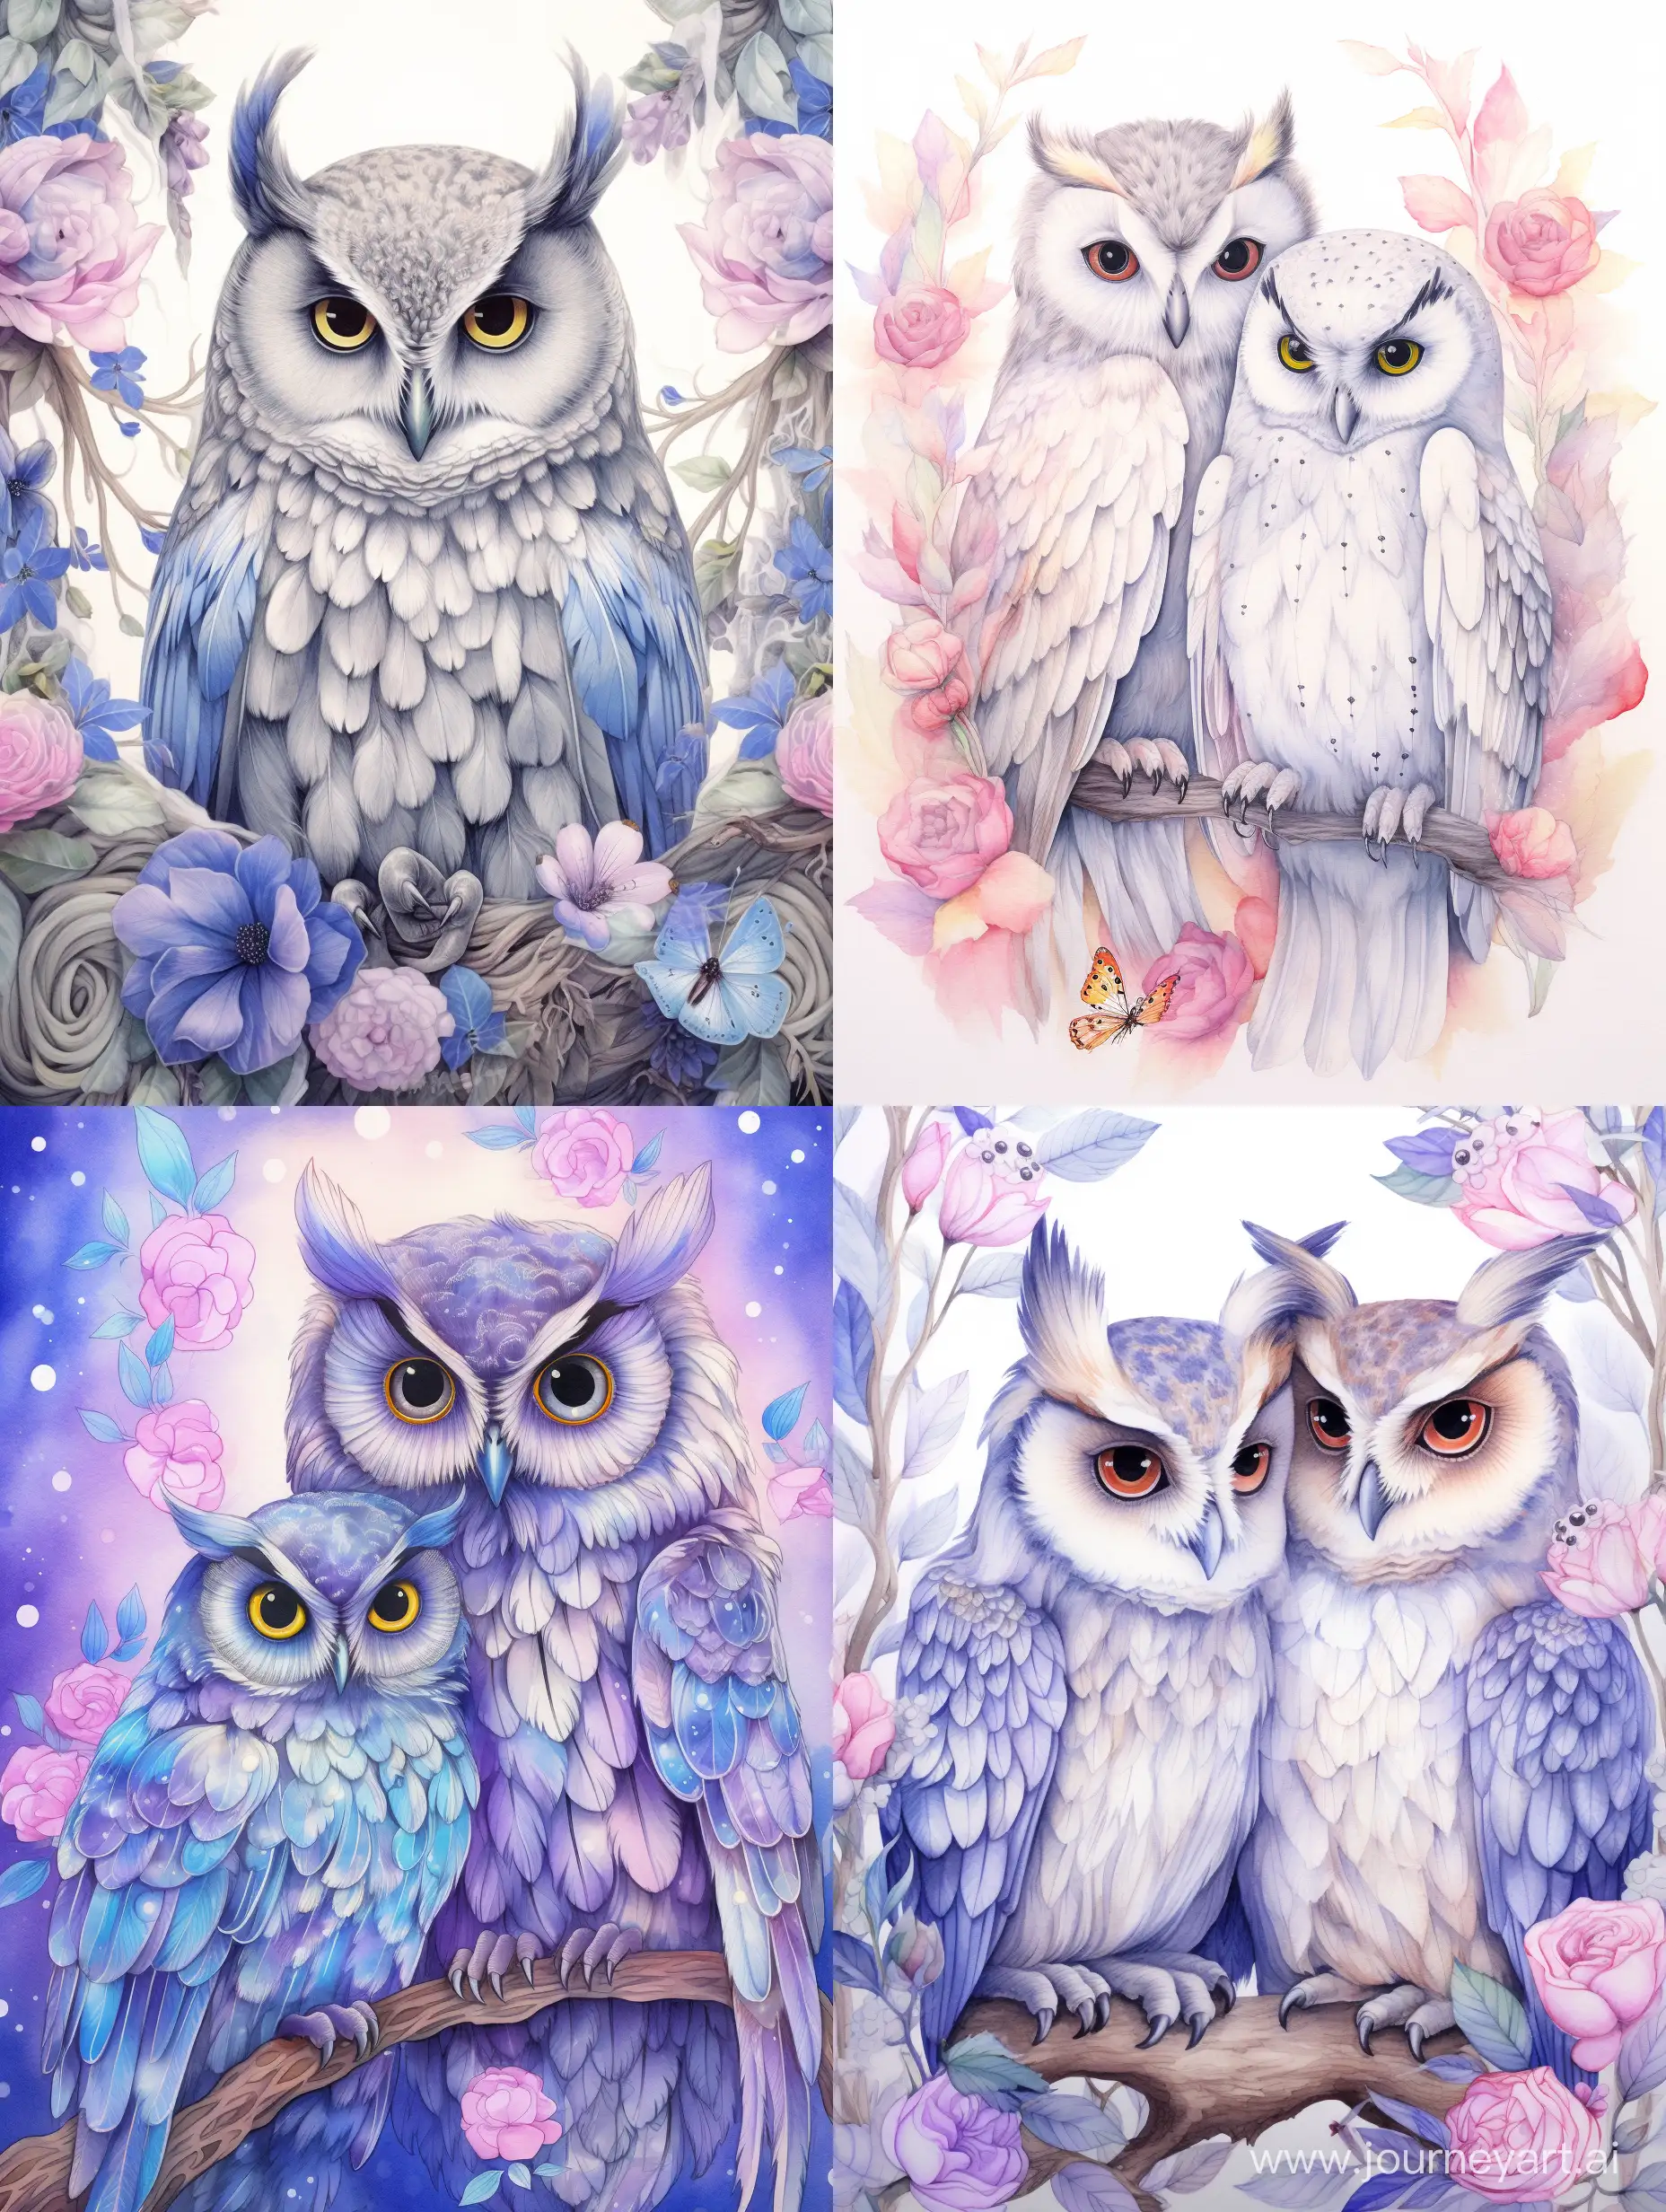 Enchanting-Owl-Family-Embraced-in-Shimmering-Wings